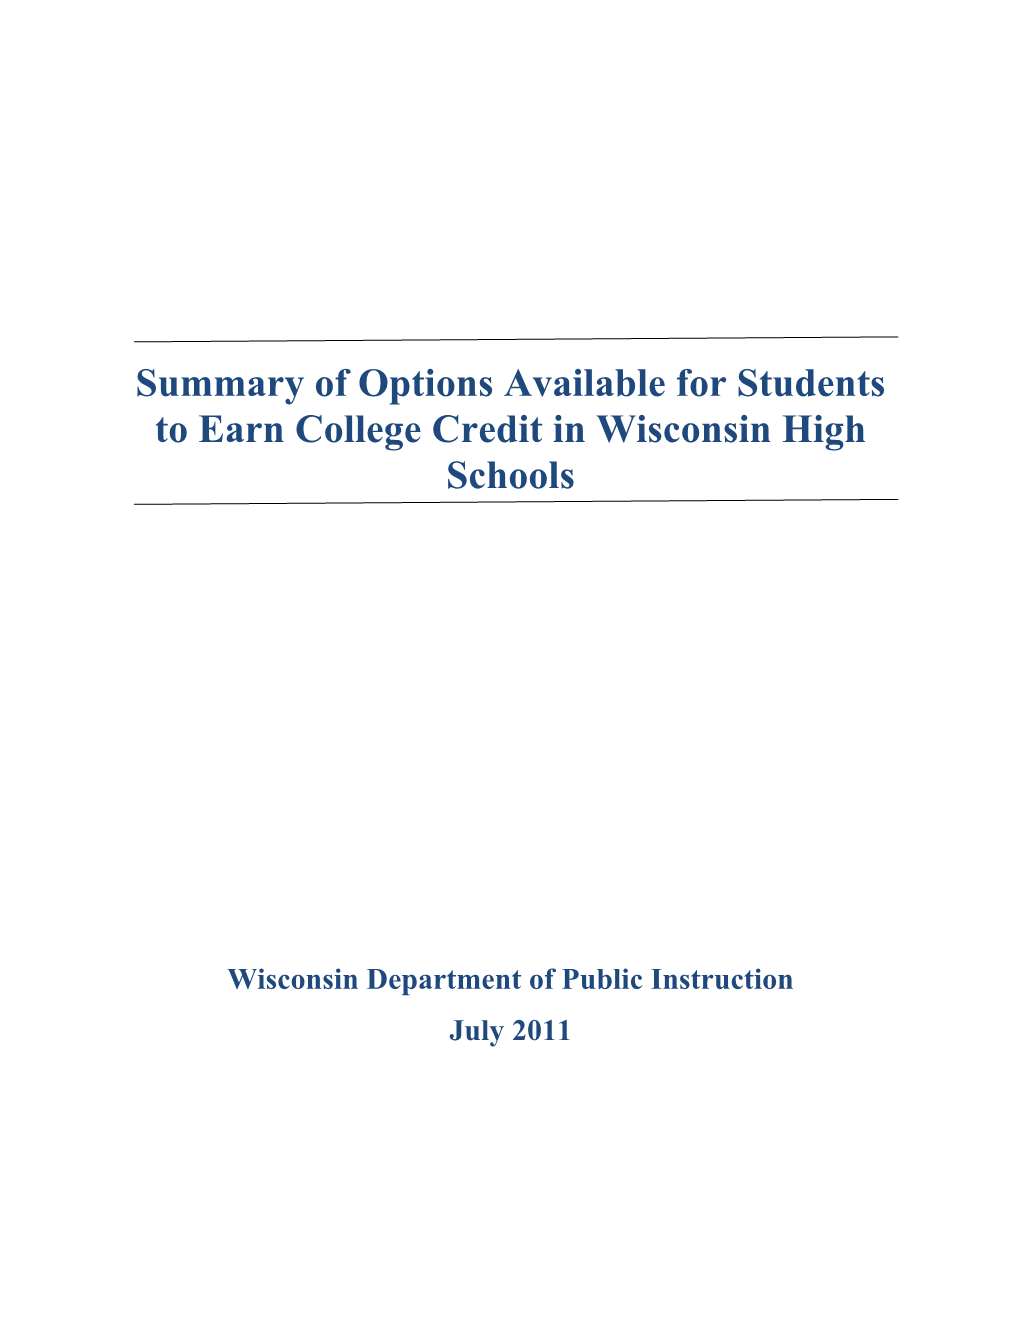 Summary of Options Available for Students to Earn College Credit in Wisconsin High Schools